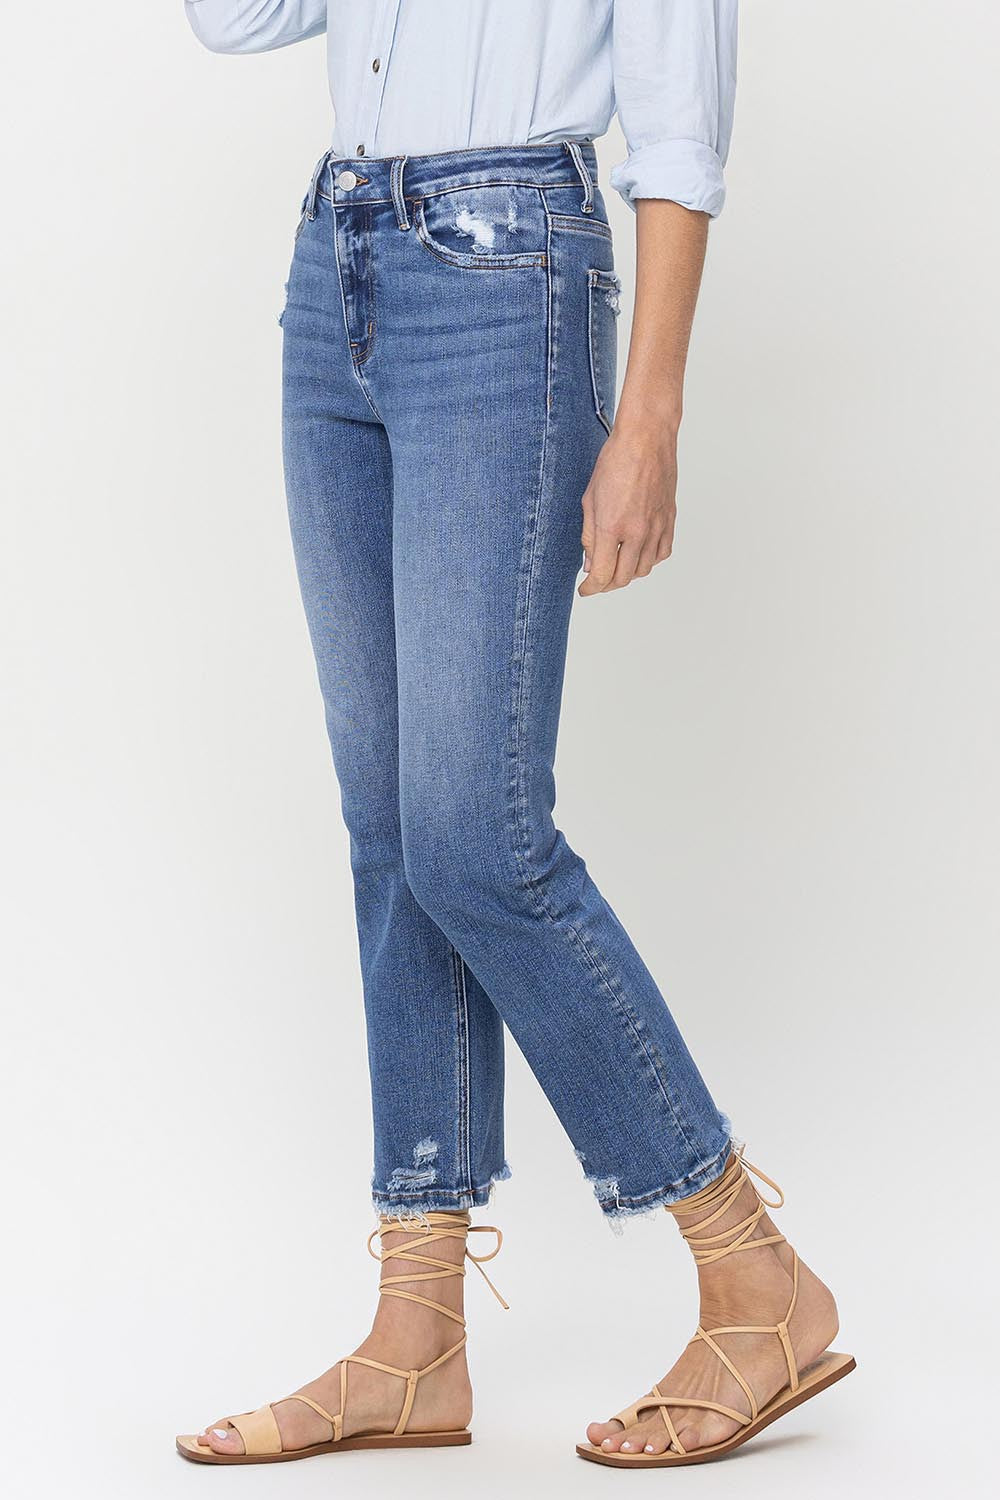 Discover Lovervet High Rise Jeans: perfect stretch for comfort, raw hem for edge. Elevate your style with a timeless classic!